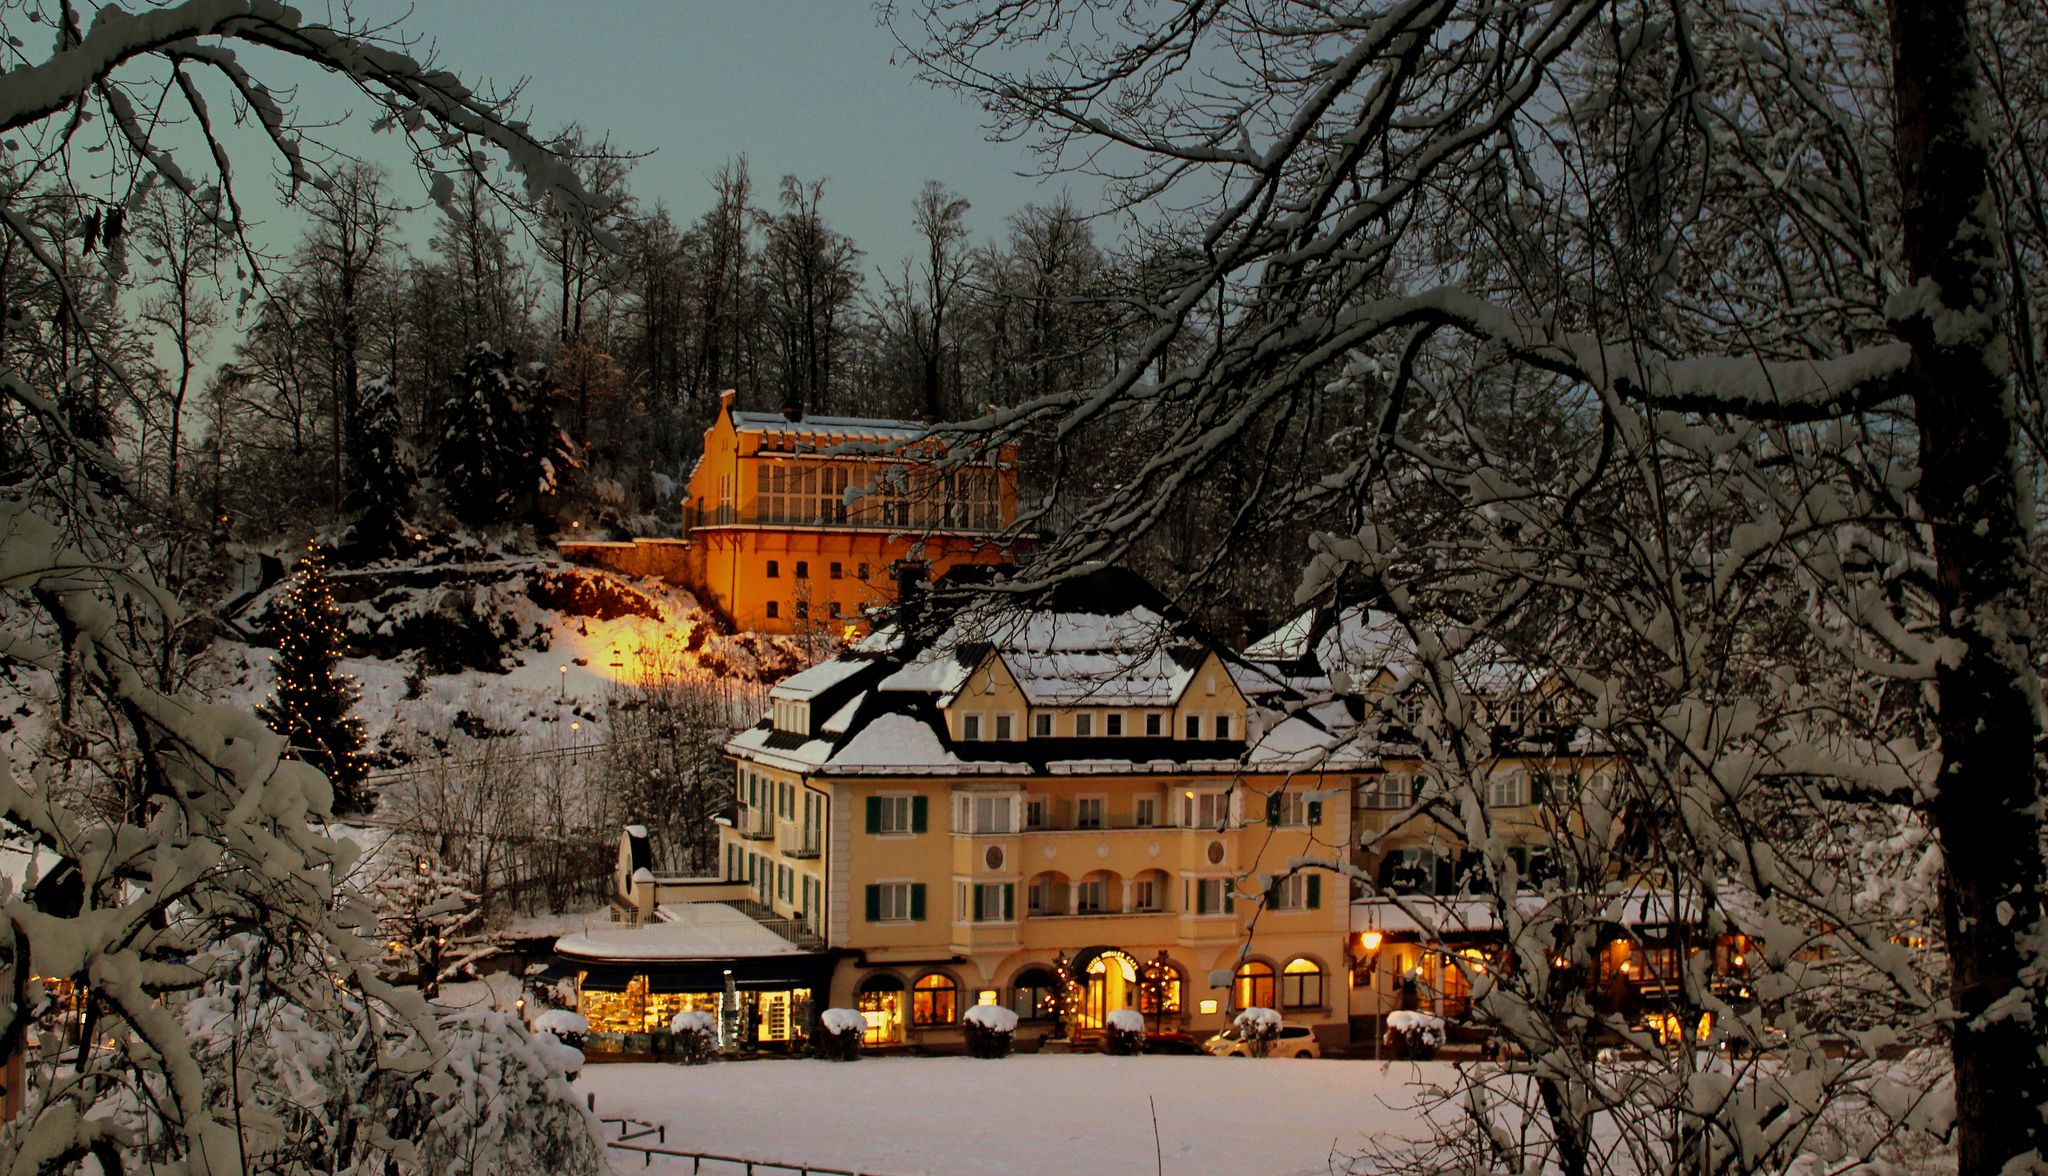 architecture, Castle, Nature, Landscape, Trees, Forest, Snow, Winter, Branch, Lights, Hotel, Germany Wallpaper